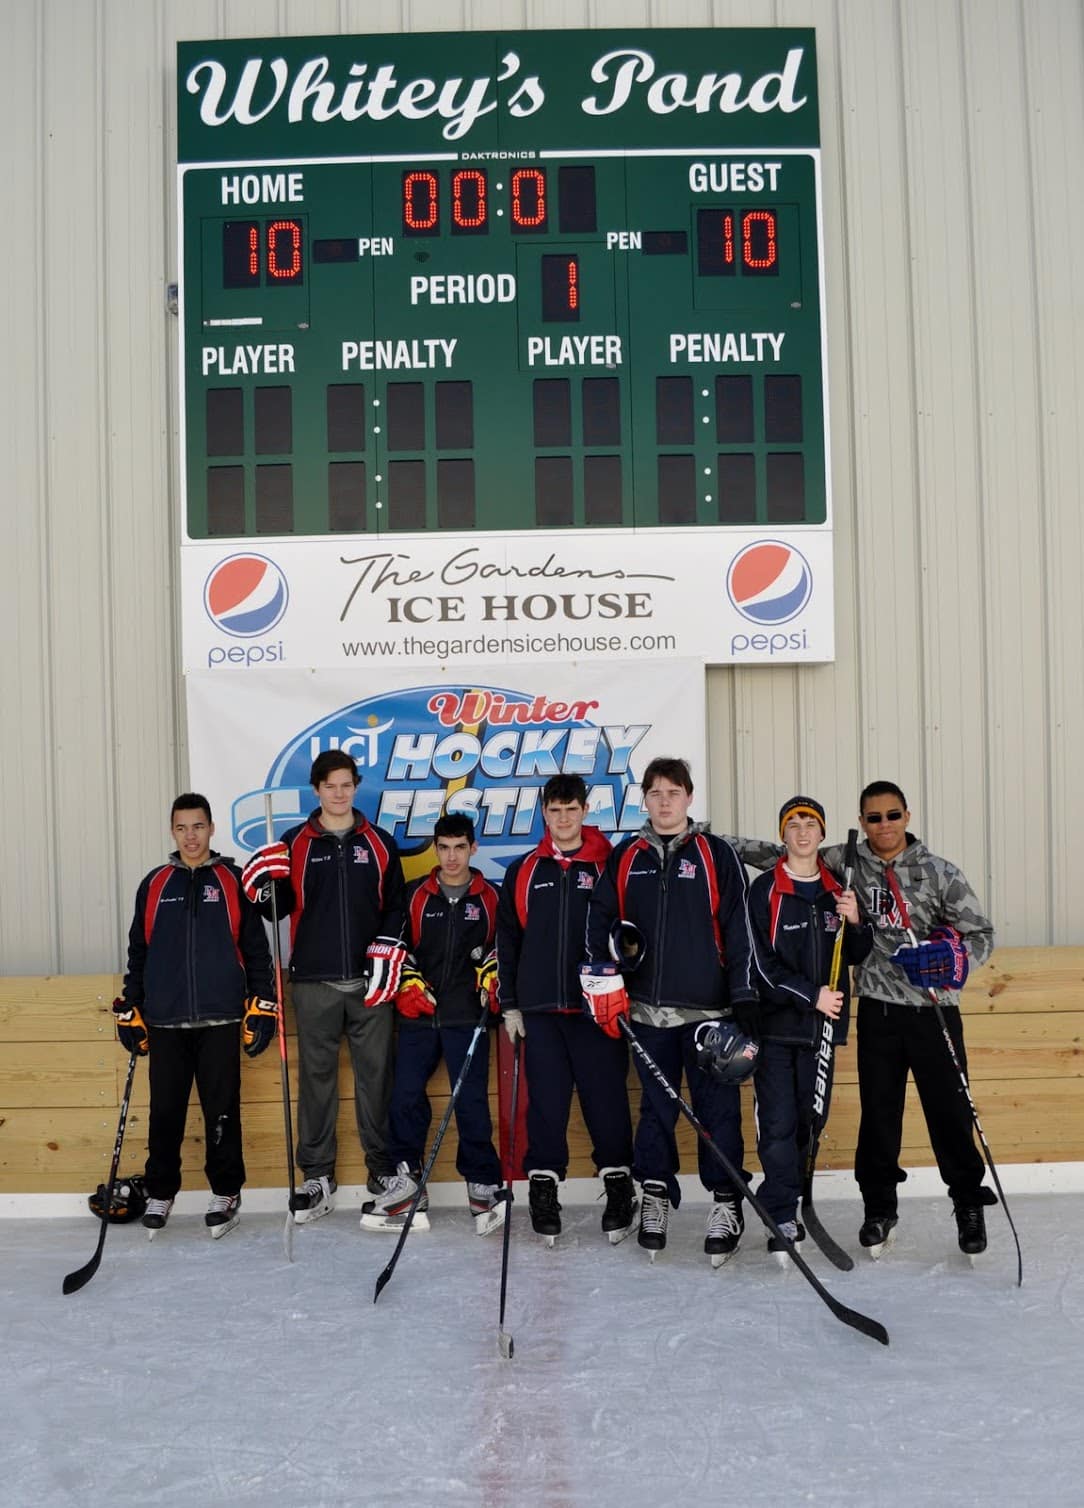 high school hockey players on ice, earning service hours at a hockey tournament